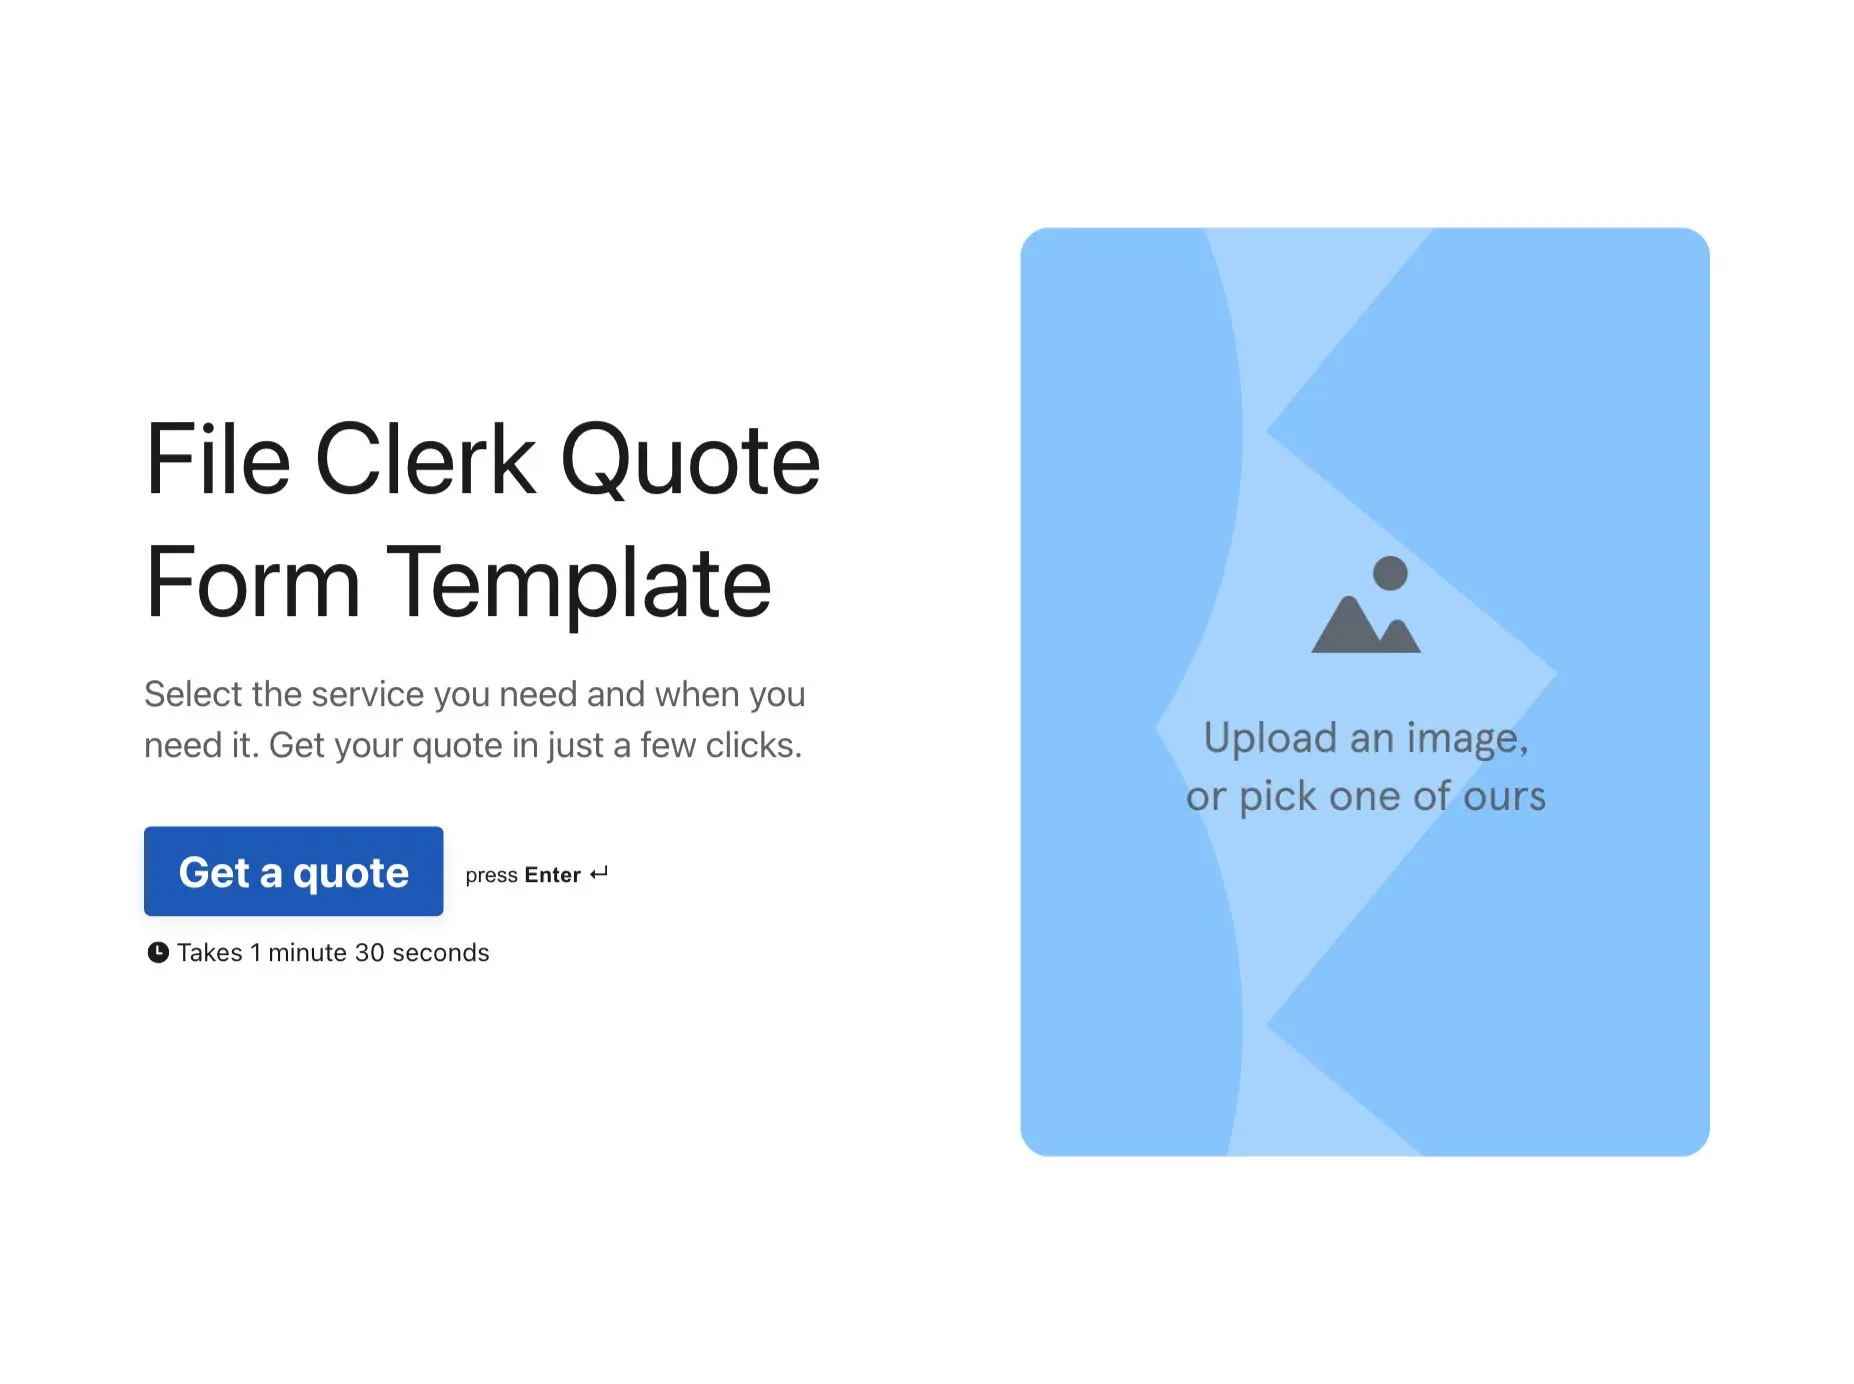 File Clerk Quote Form Template Hero